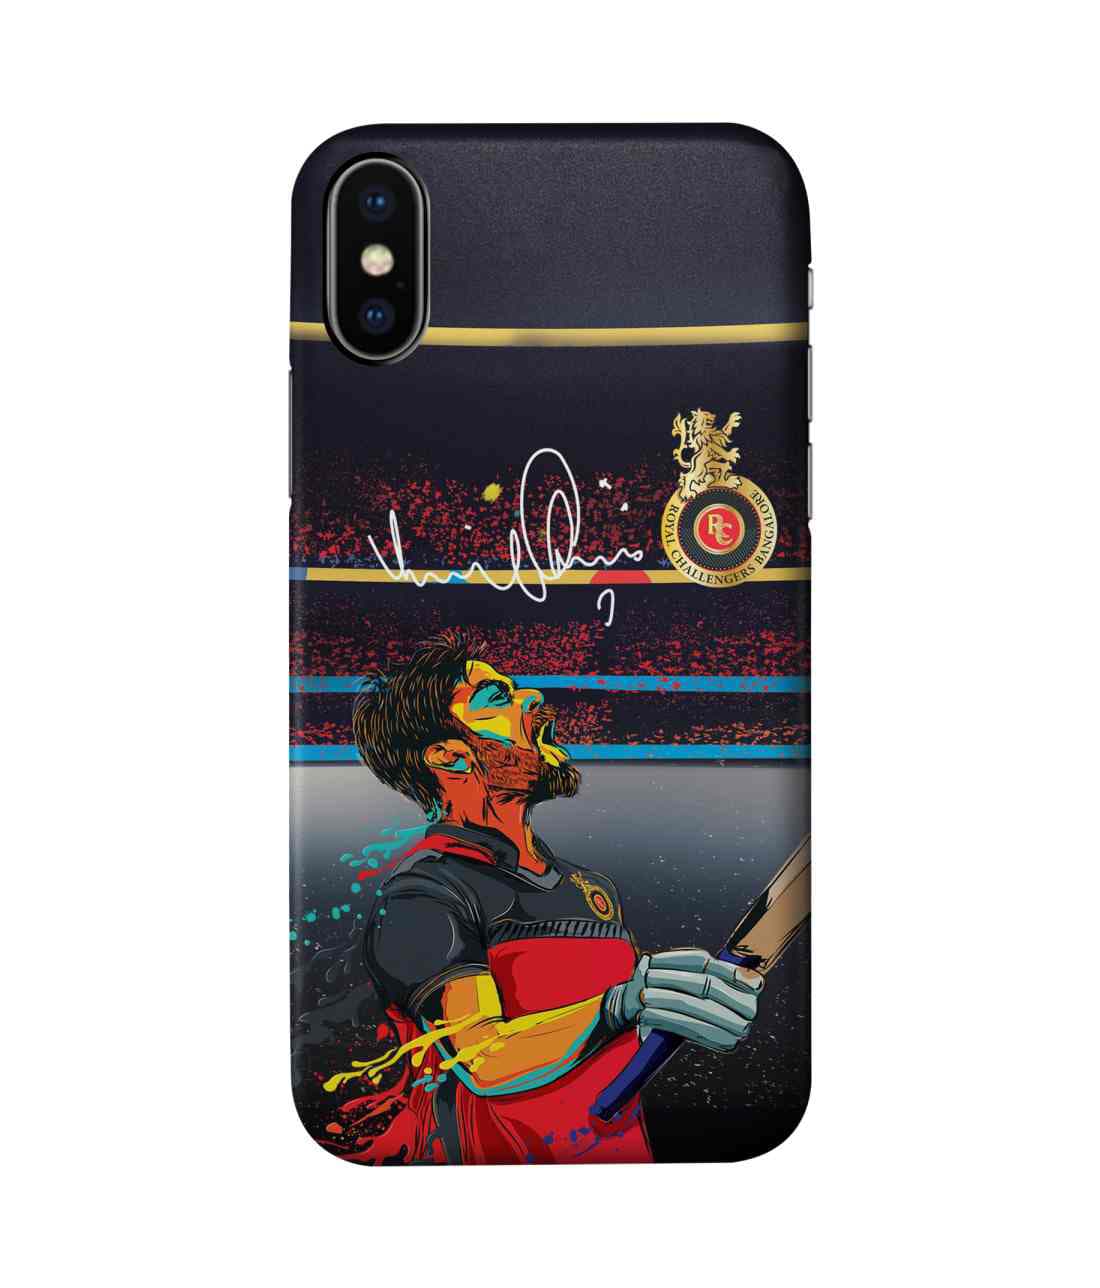 Buy Signature Virat Aggression - Pro Case for iPhone X Phone Cases & Covers Online